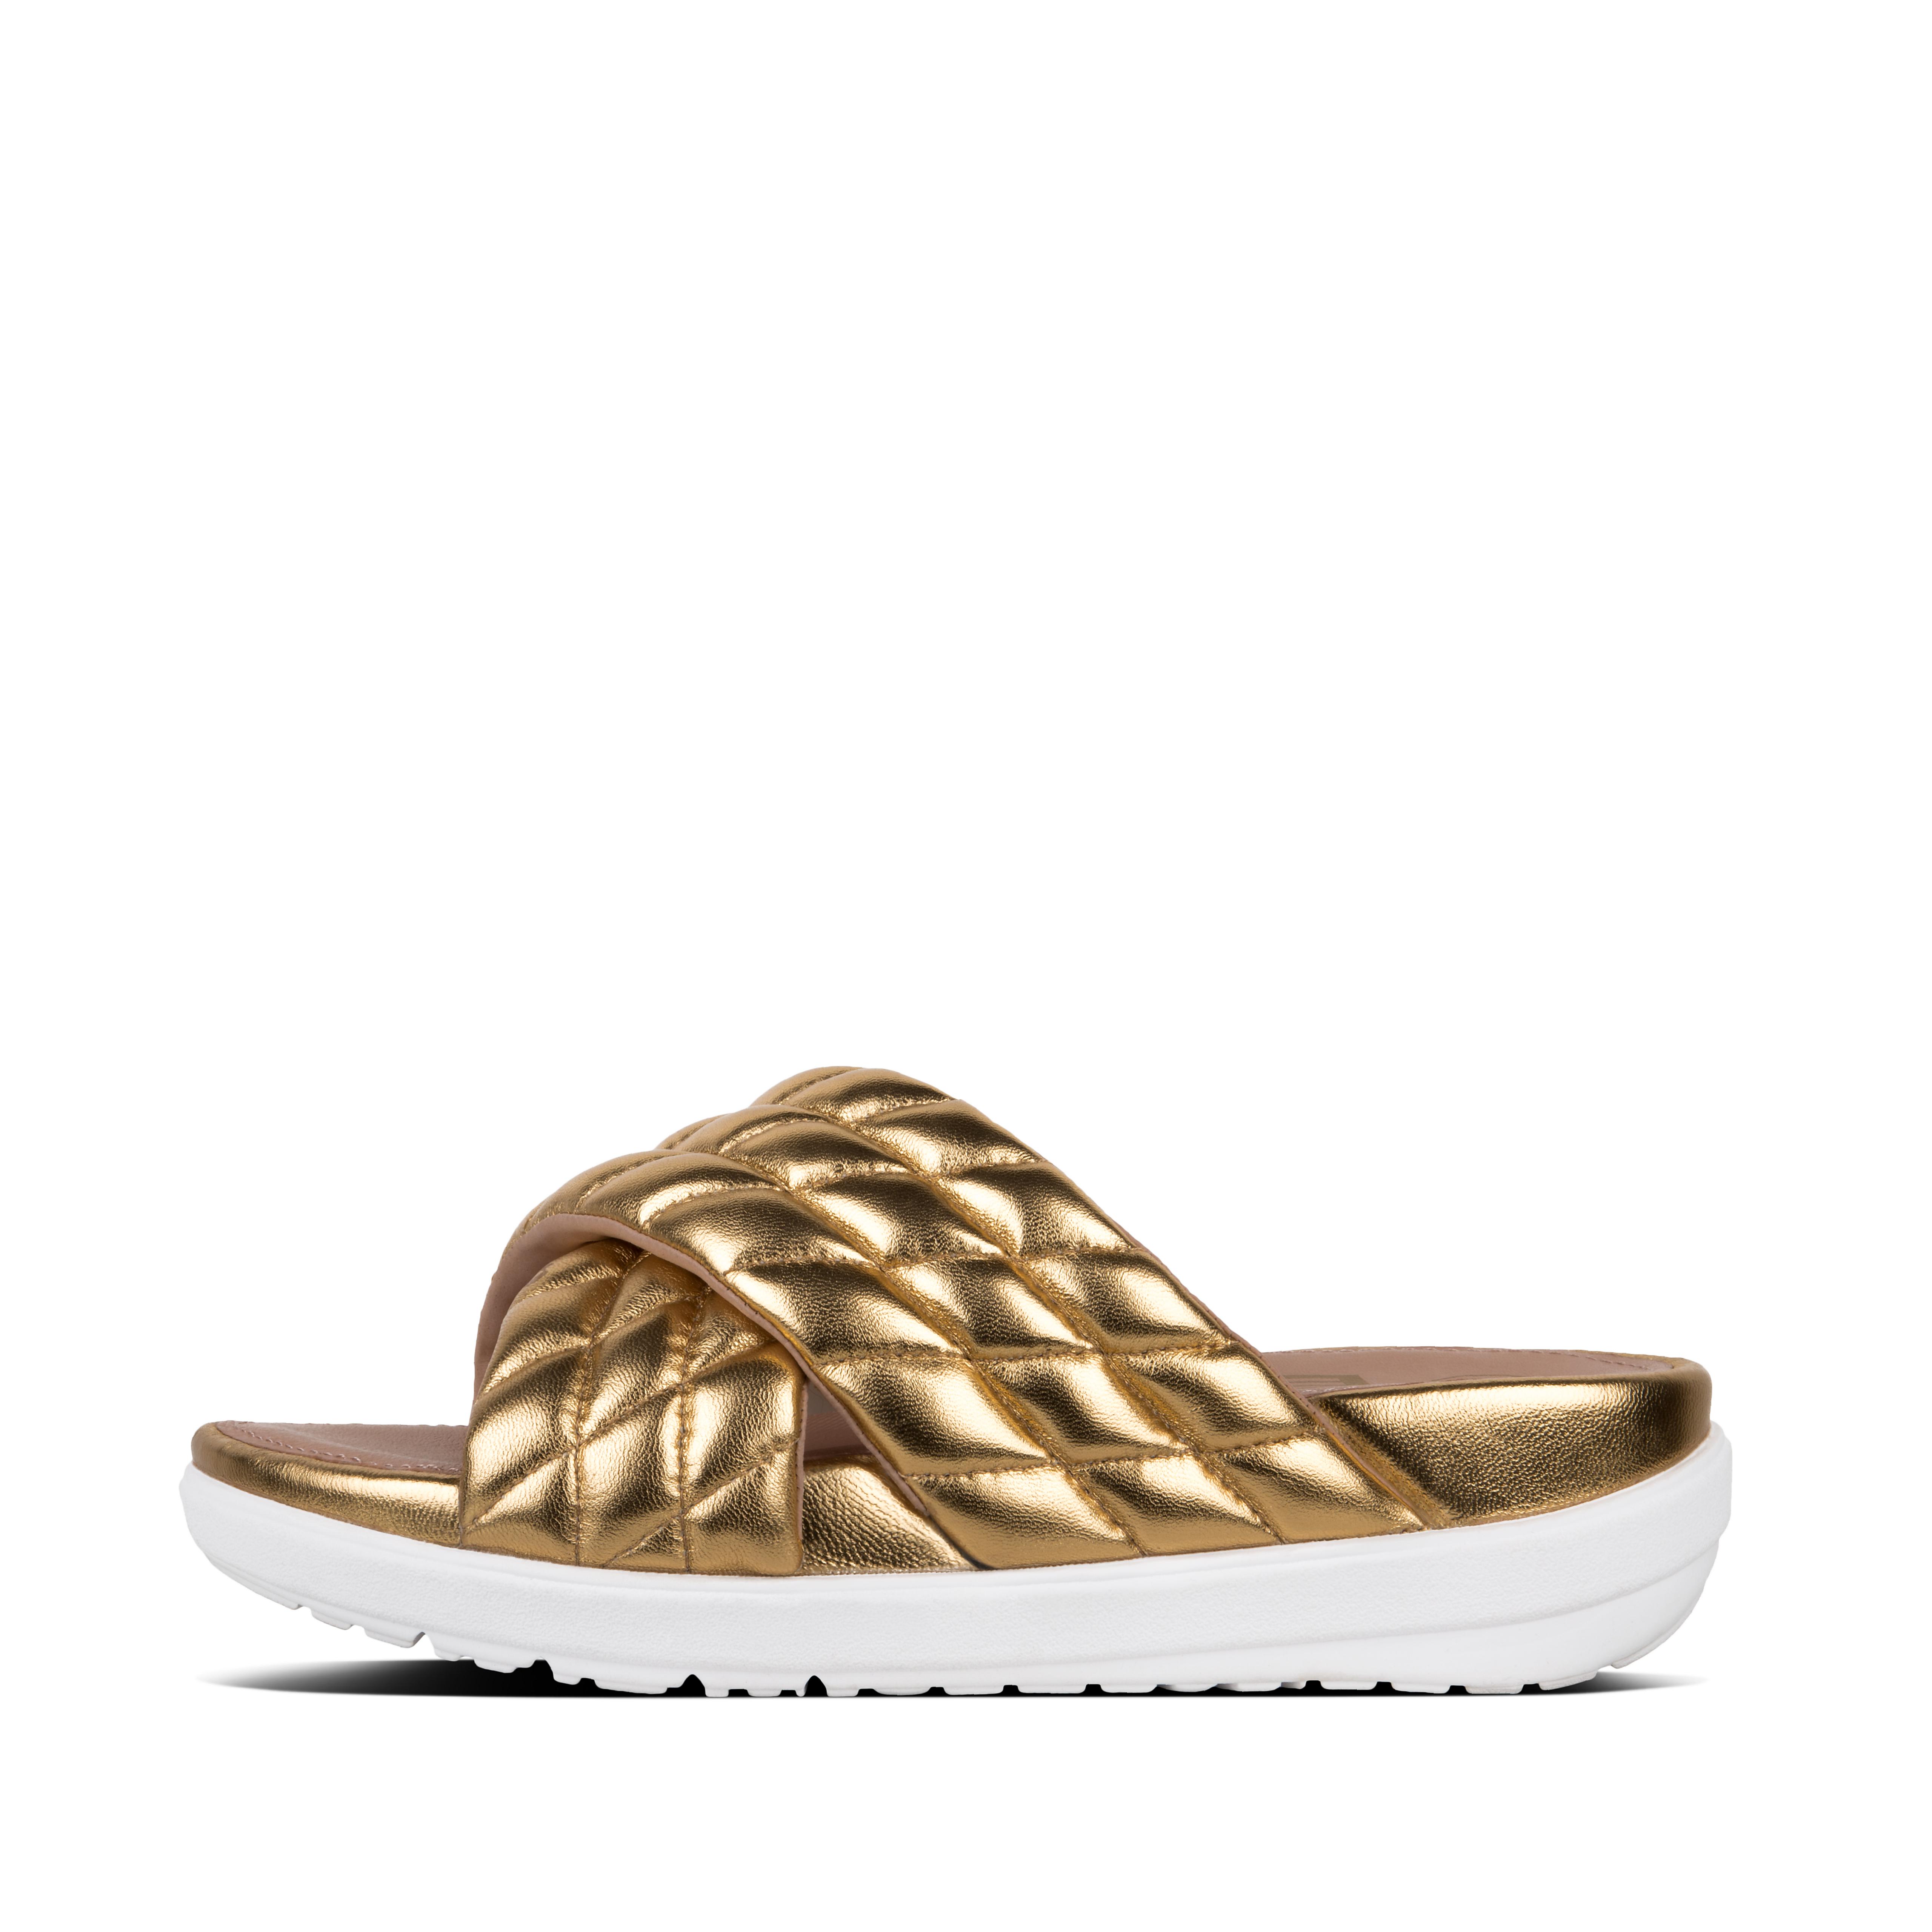 loosh luxe fitflop